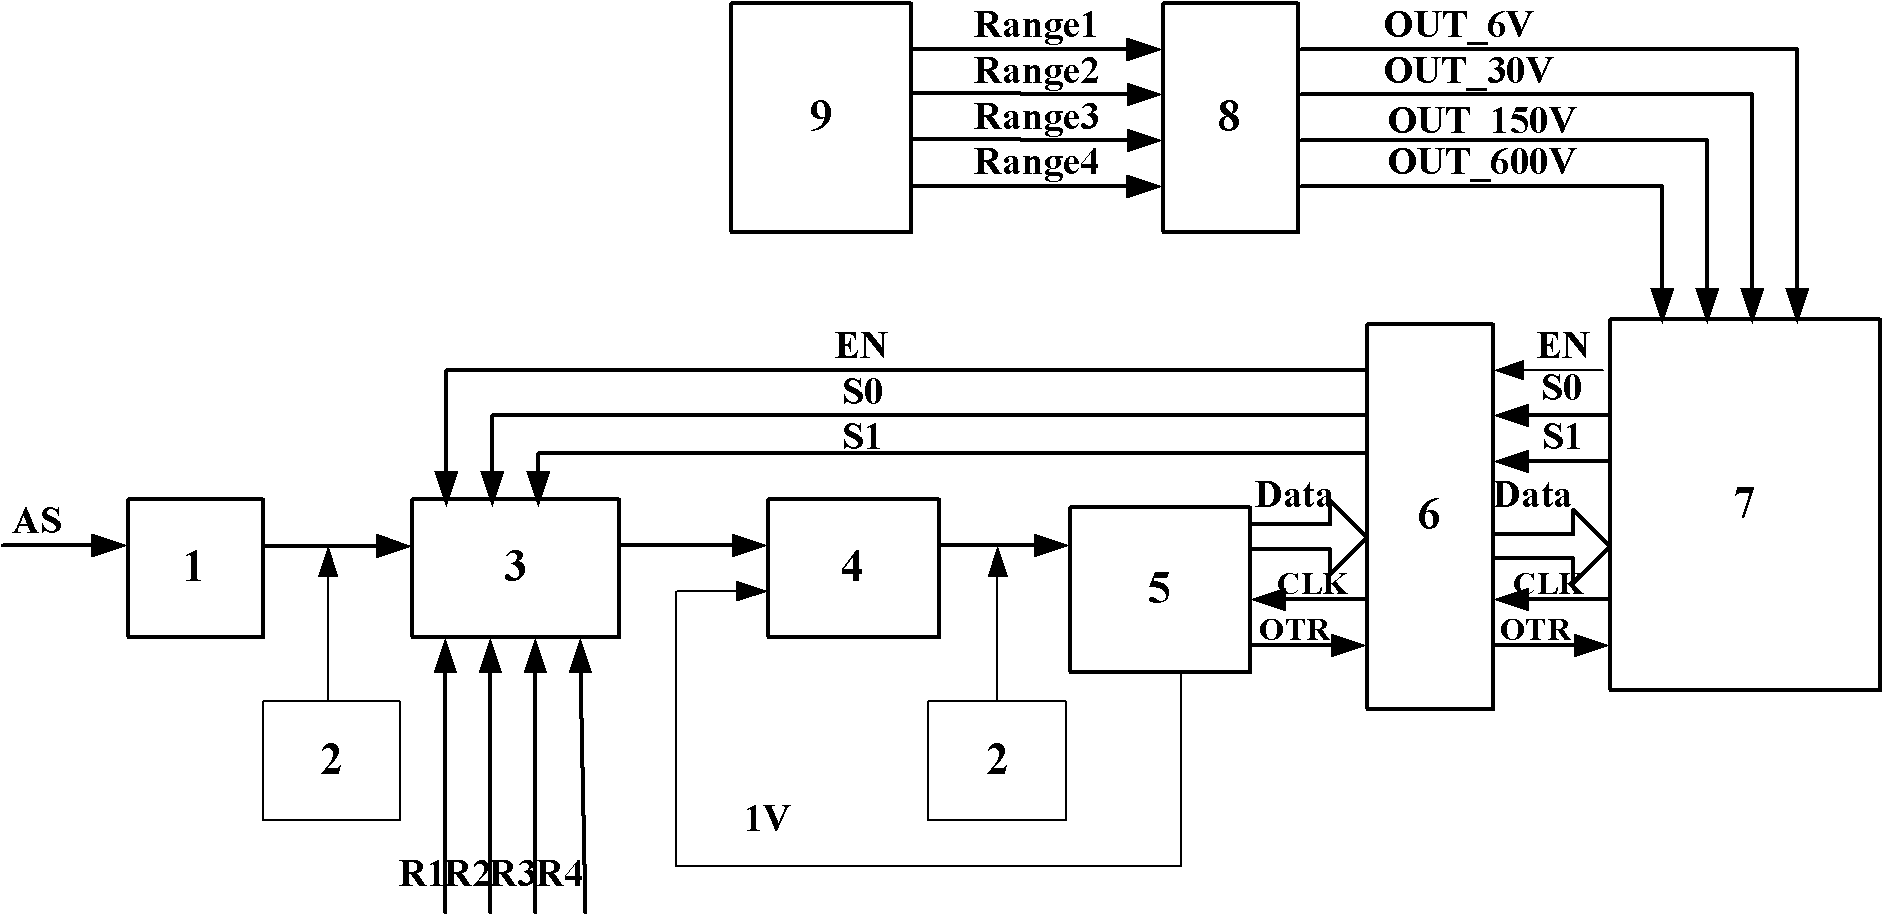 Wide voltage data collection device based on complex programmable logic device (CPLD)